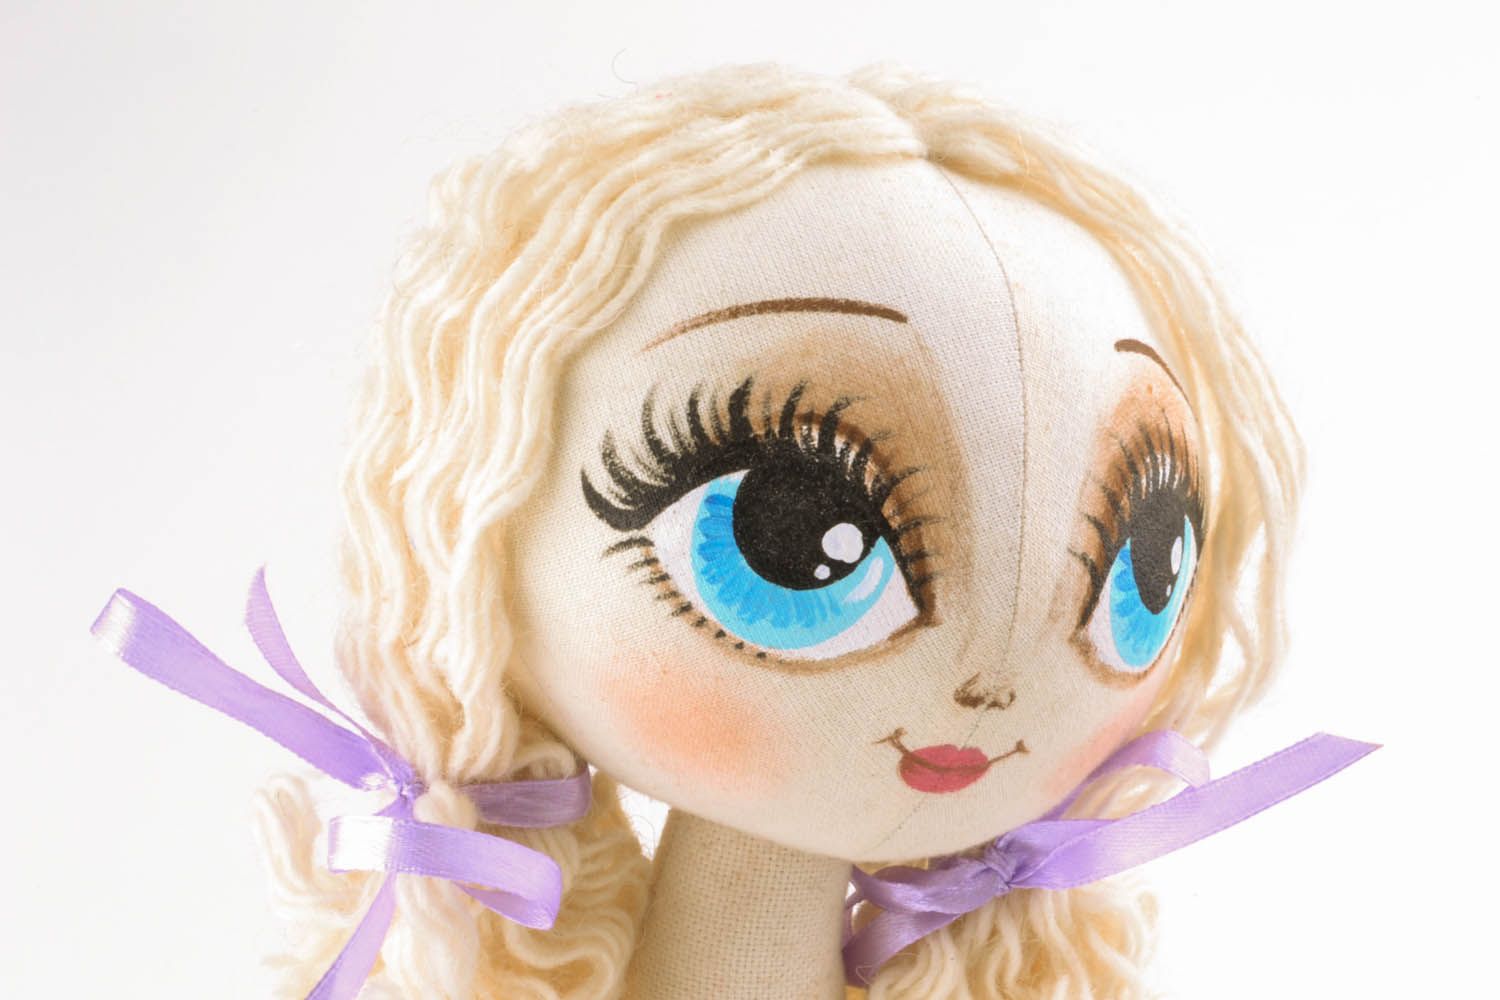 Designer's doll with blue eyes photo 2